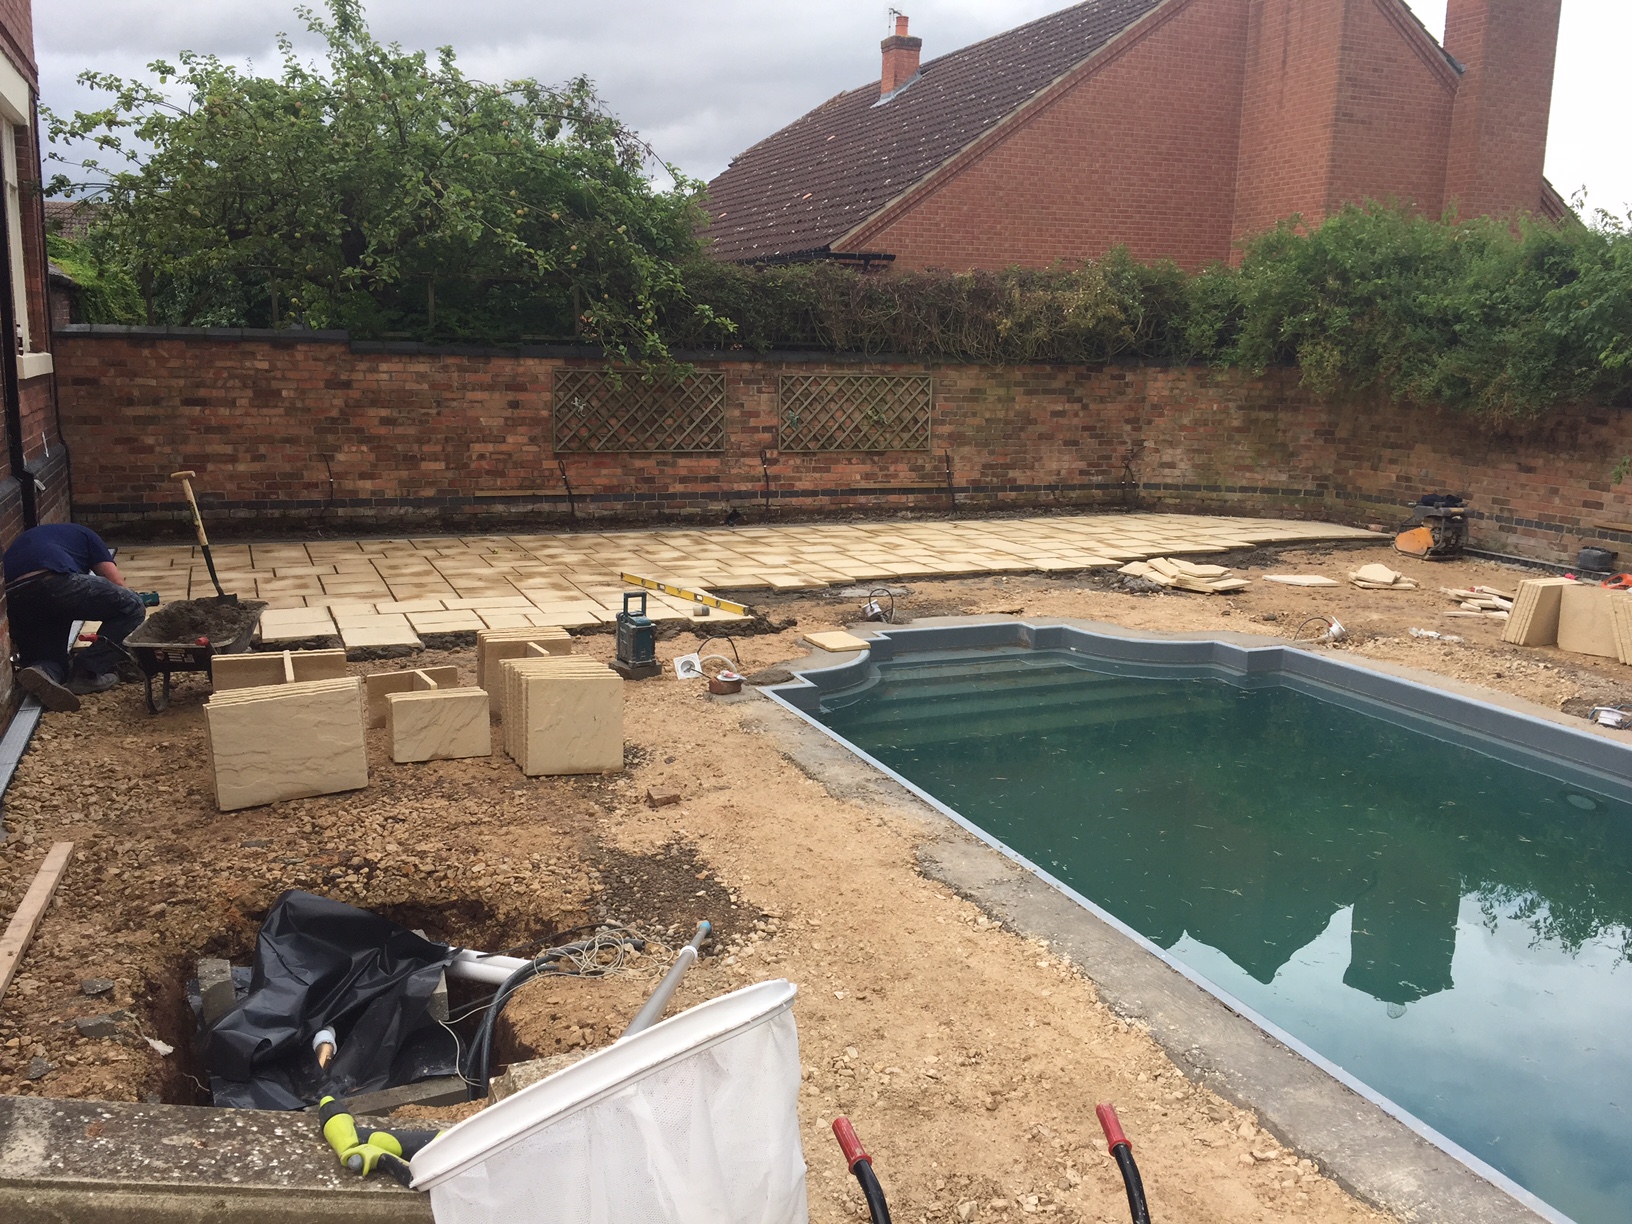 11m x 4m outdoor swimming pool in 3 weeks (with paving) - Page 60 - Homes, Gardens and DIY - PistonHeads